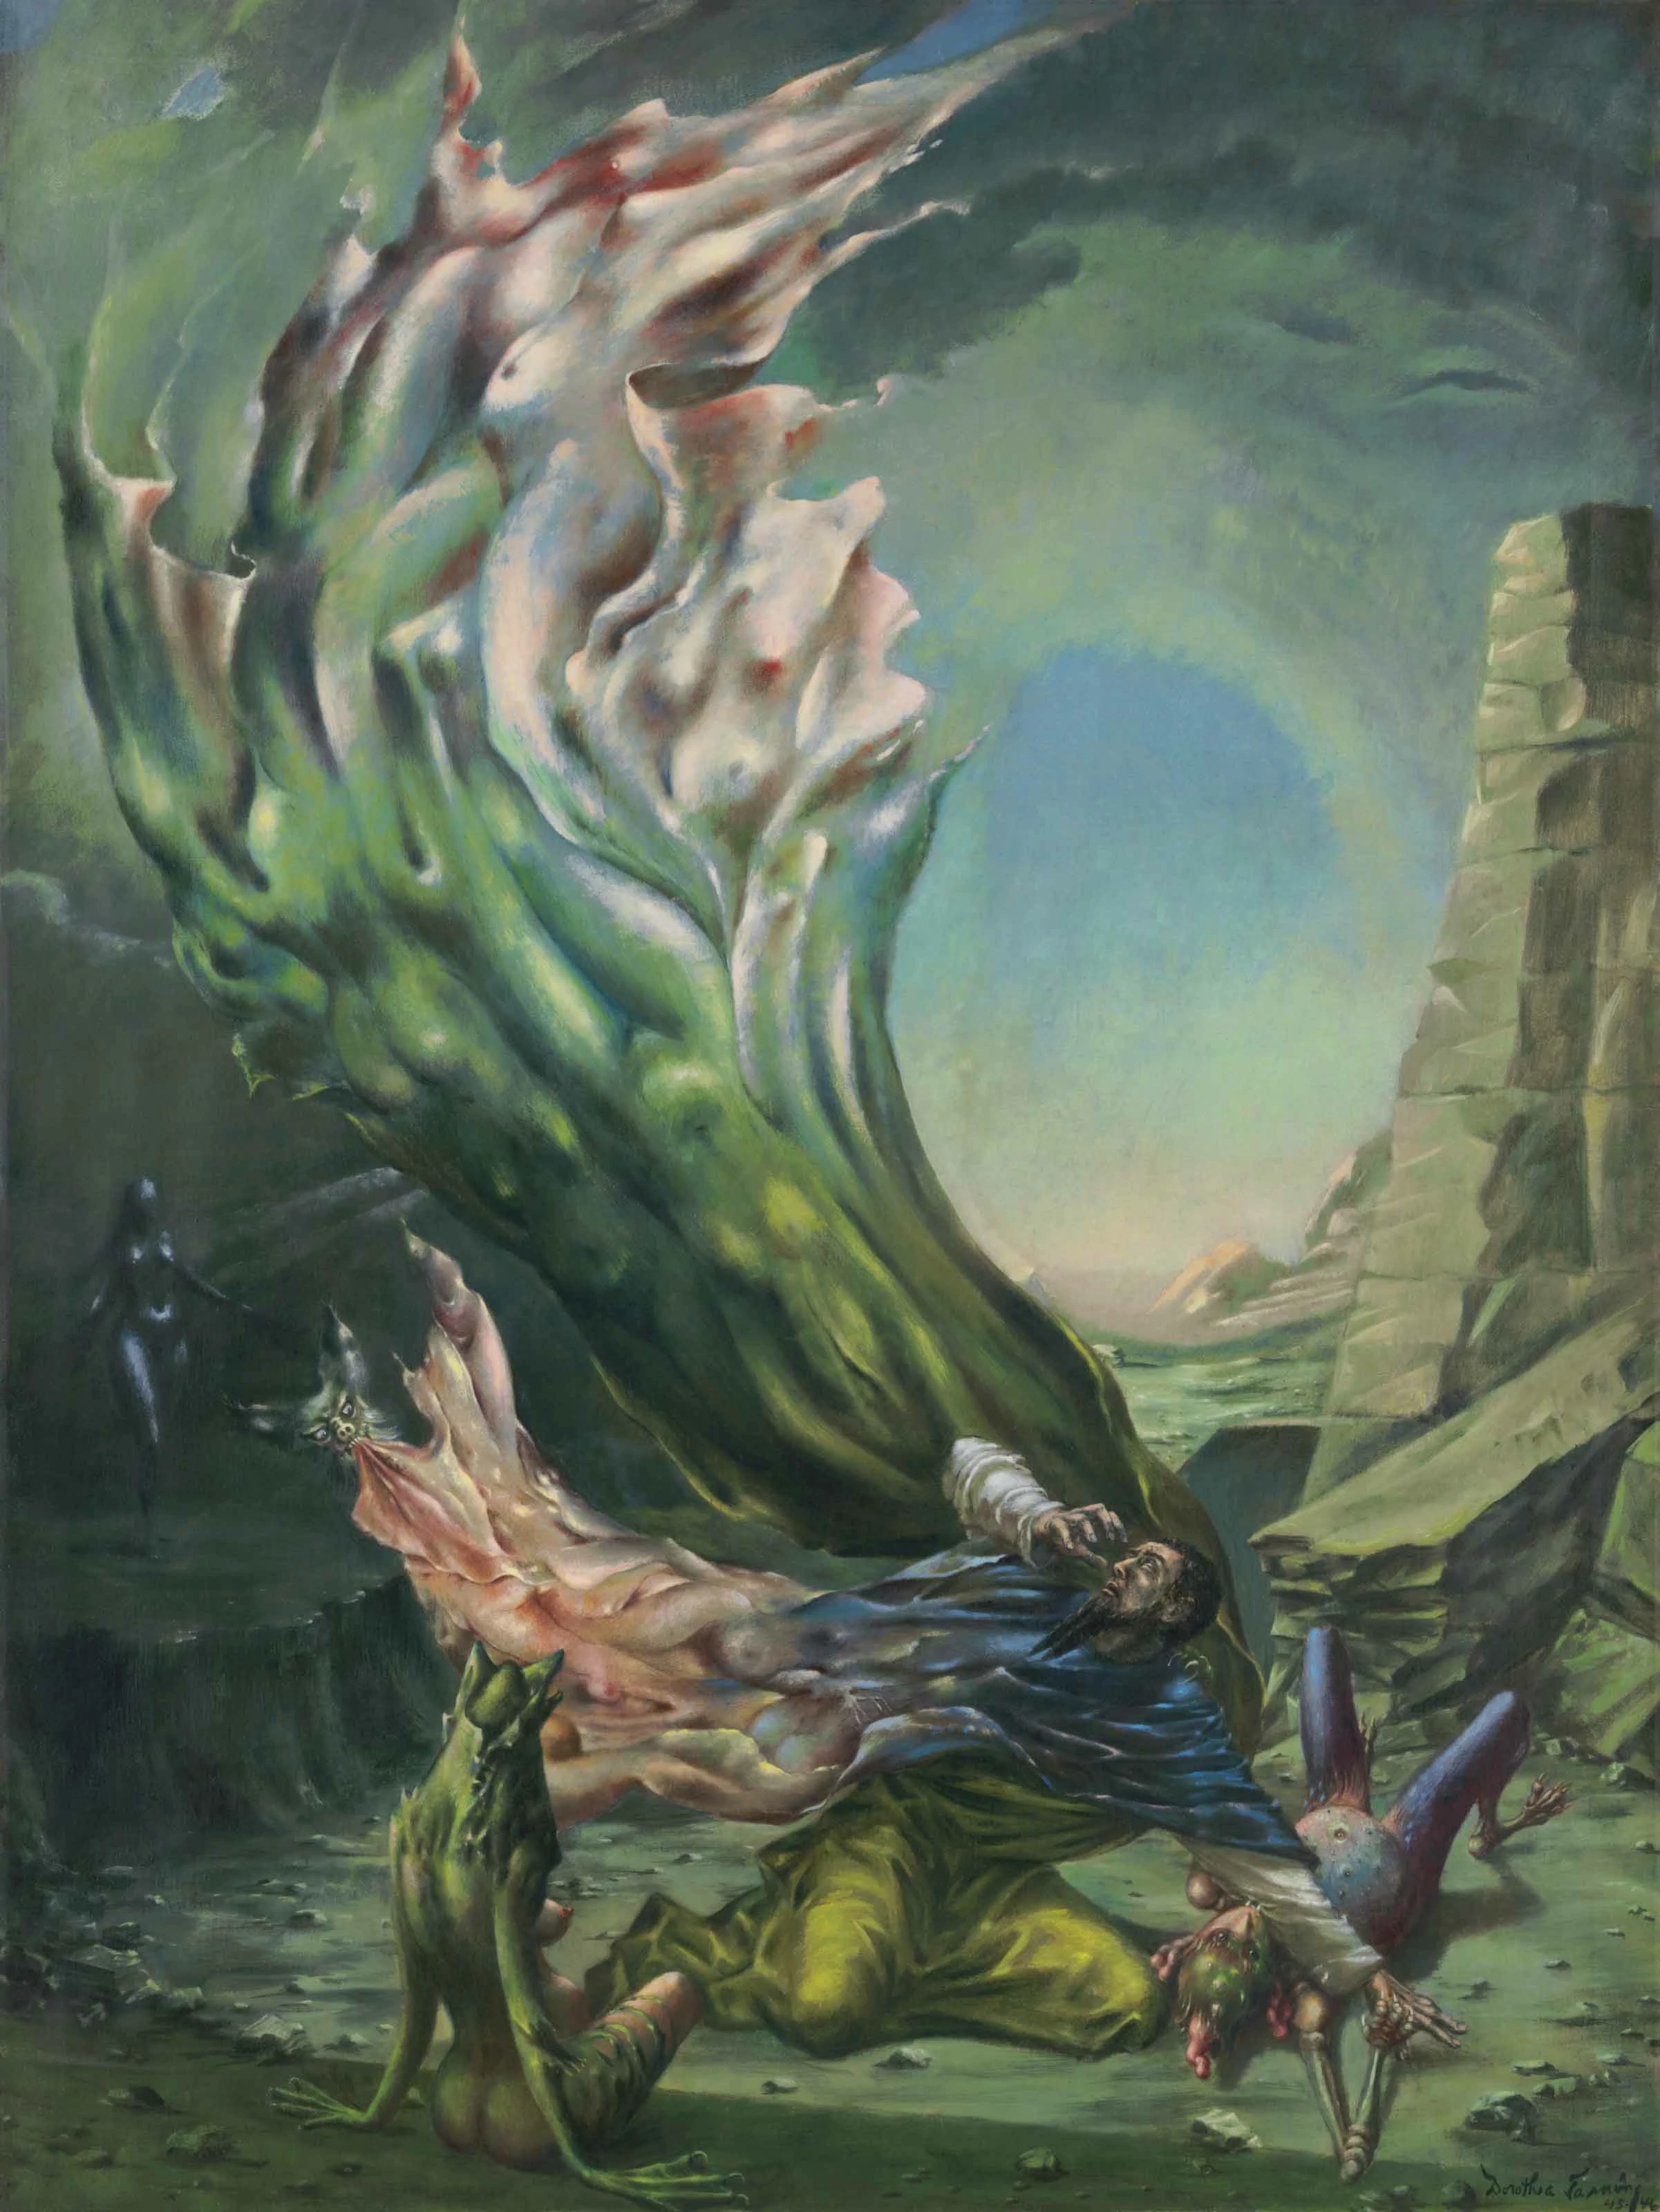 The Temptation of St. Anthony, Dorothea Tanning